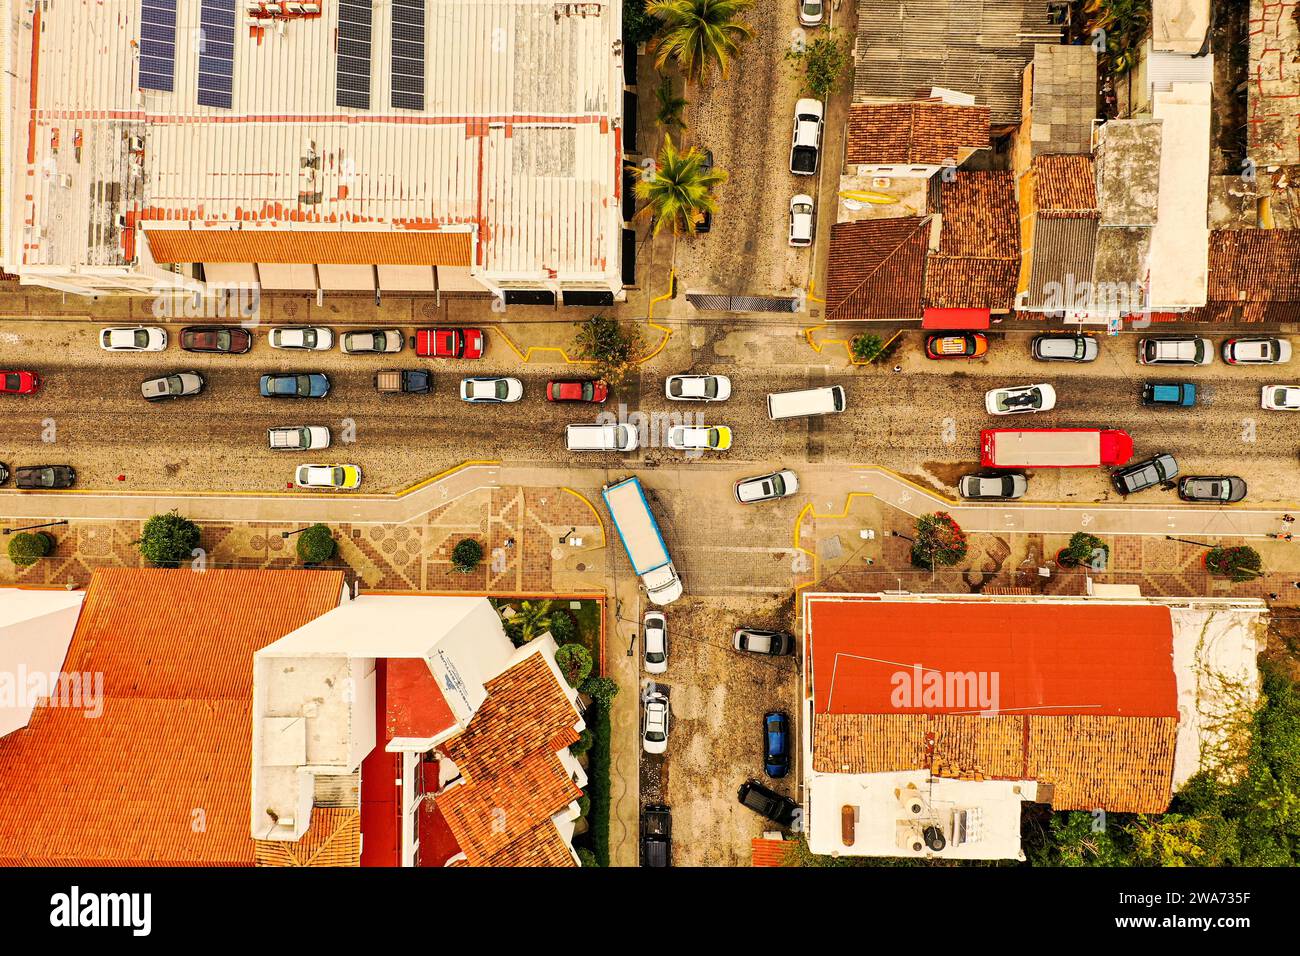 Aerial Bustle: Overhead View of Streets in Puerto Vallarta, Bustling with Traffic and Dynamic Movement Stock Photo